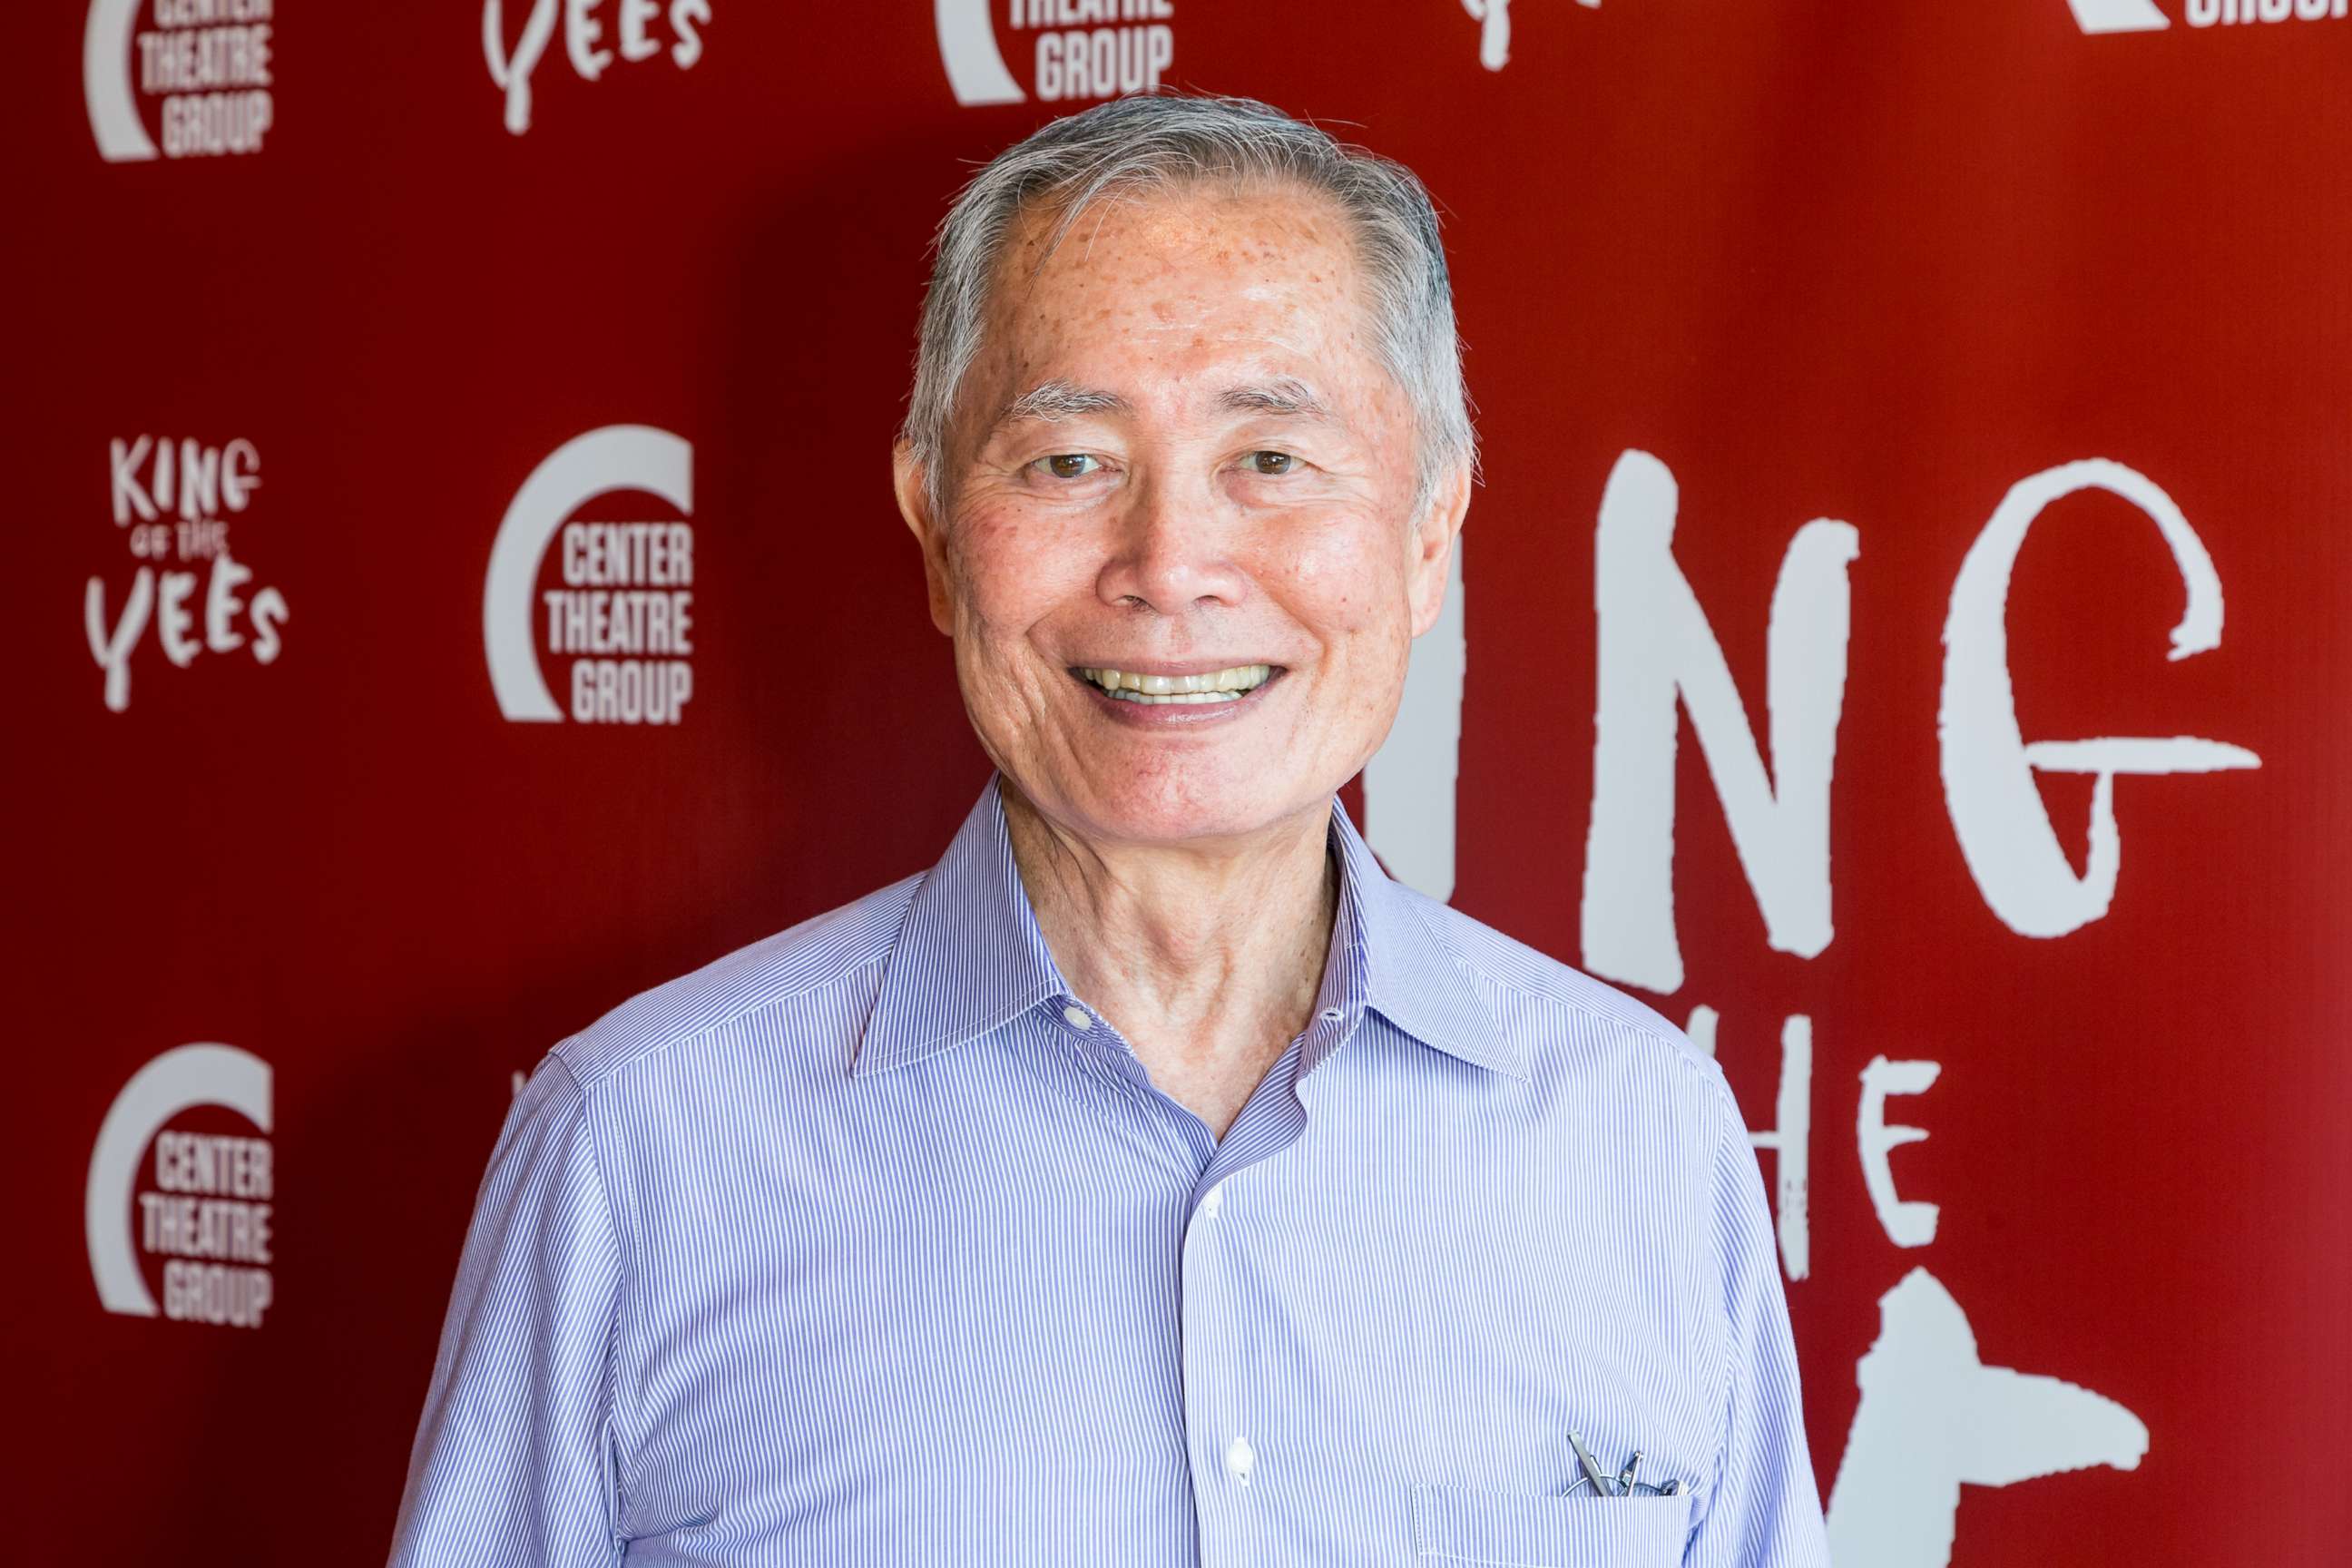 Star Trek star George Takei says hes shocked and bewildered by sexual assault claim